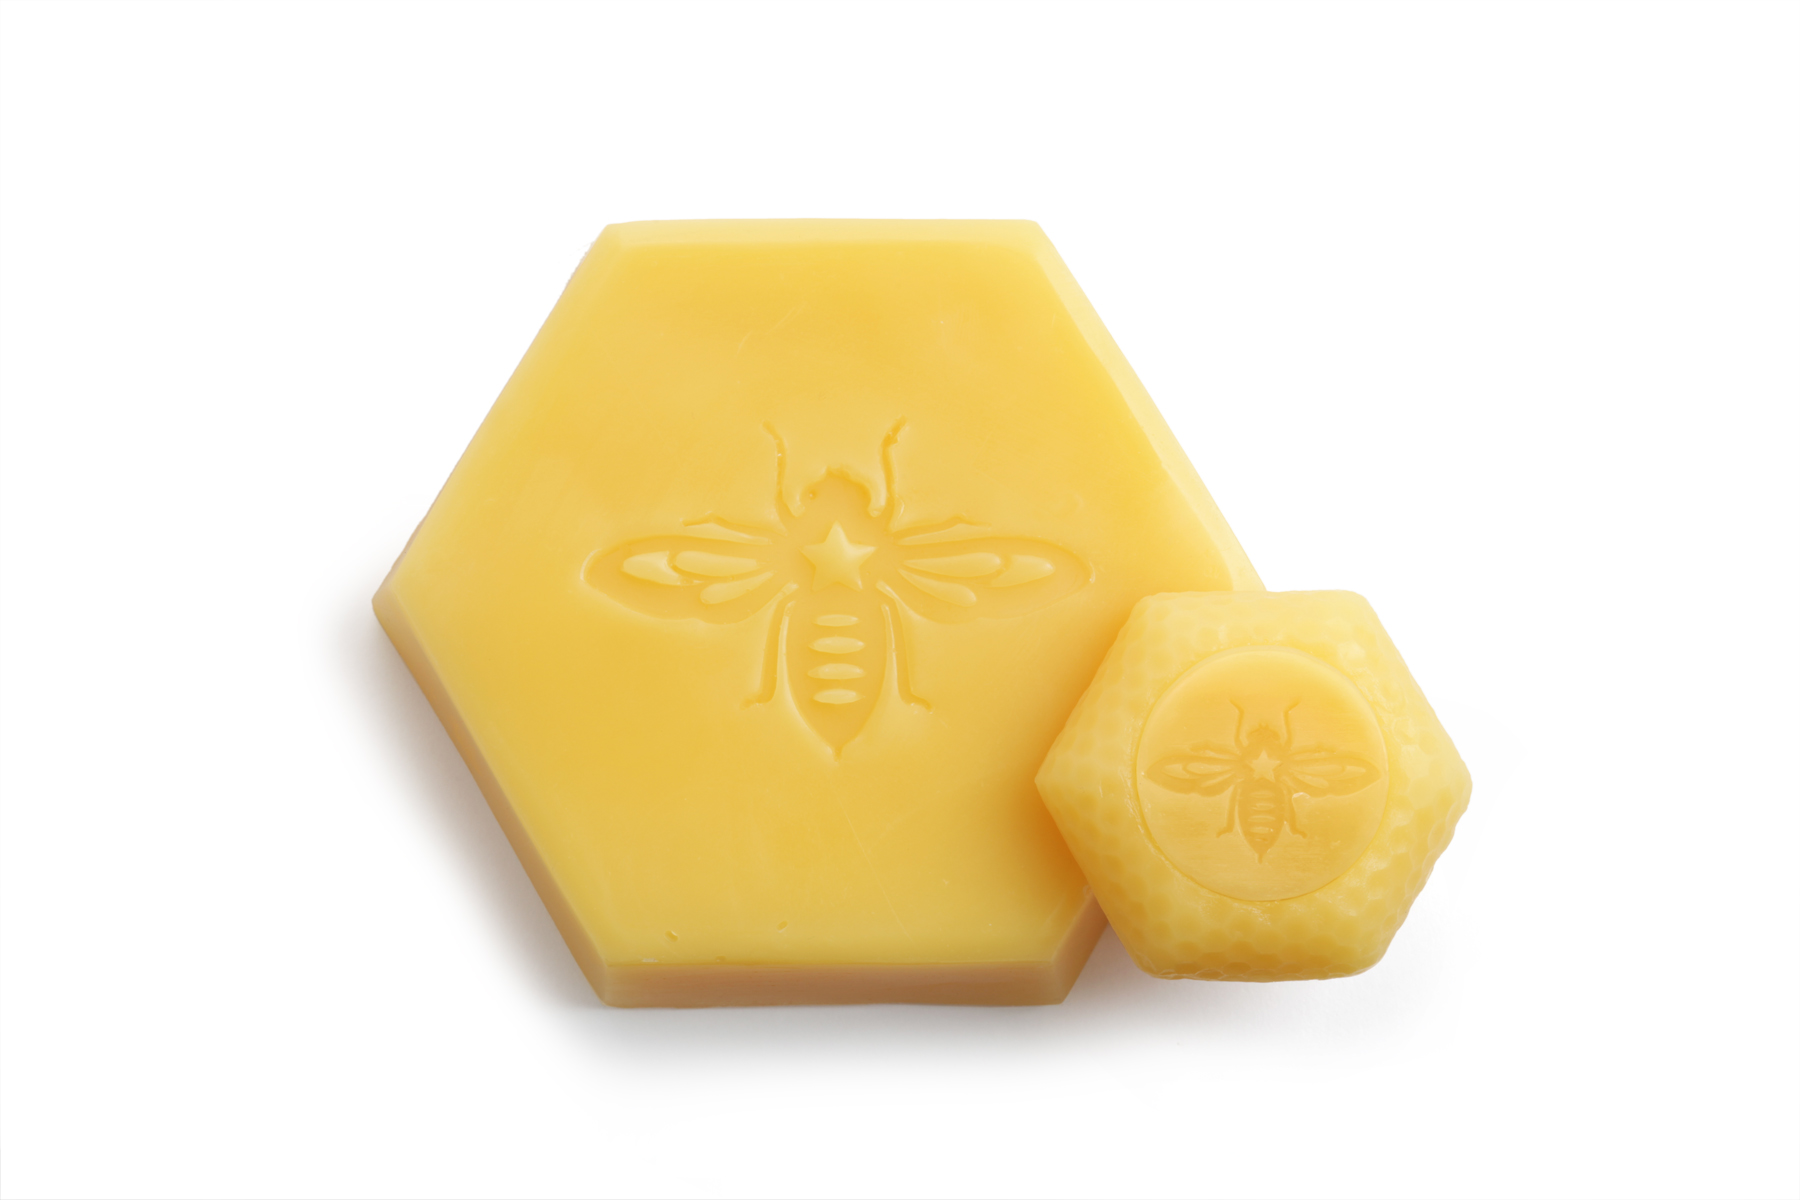 6 Uses for Beeswax Blocks You Need to Know